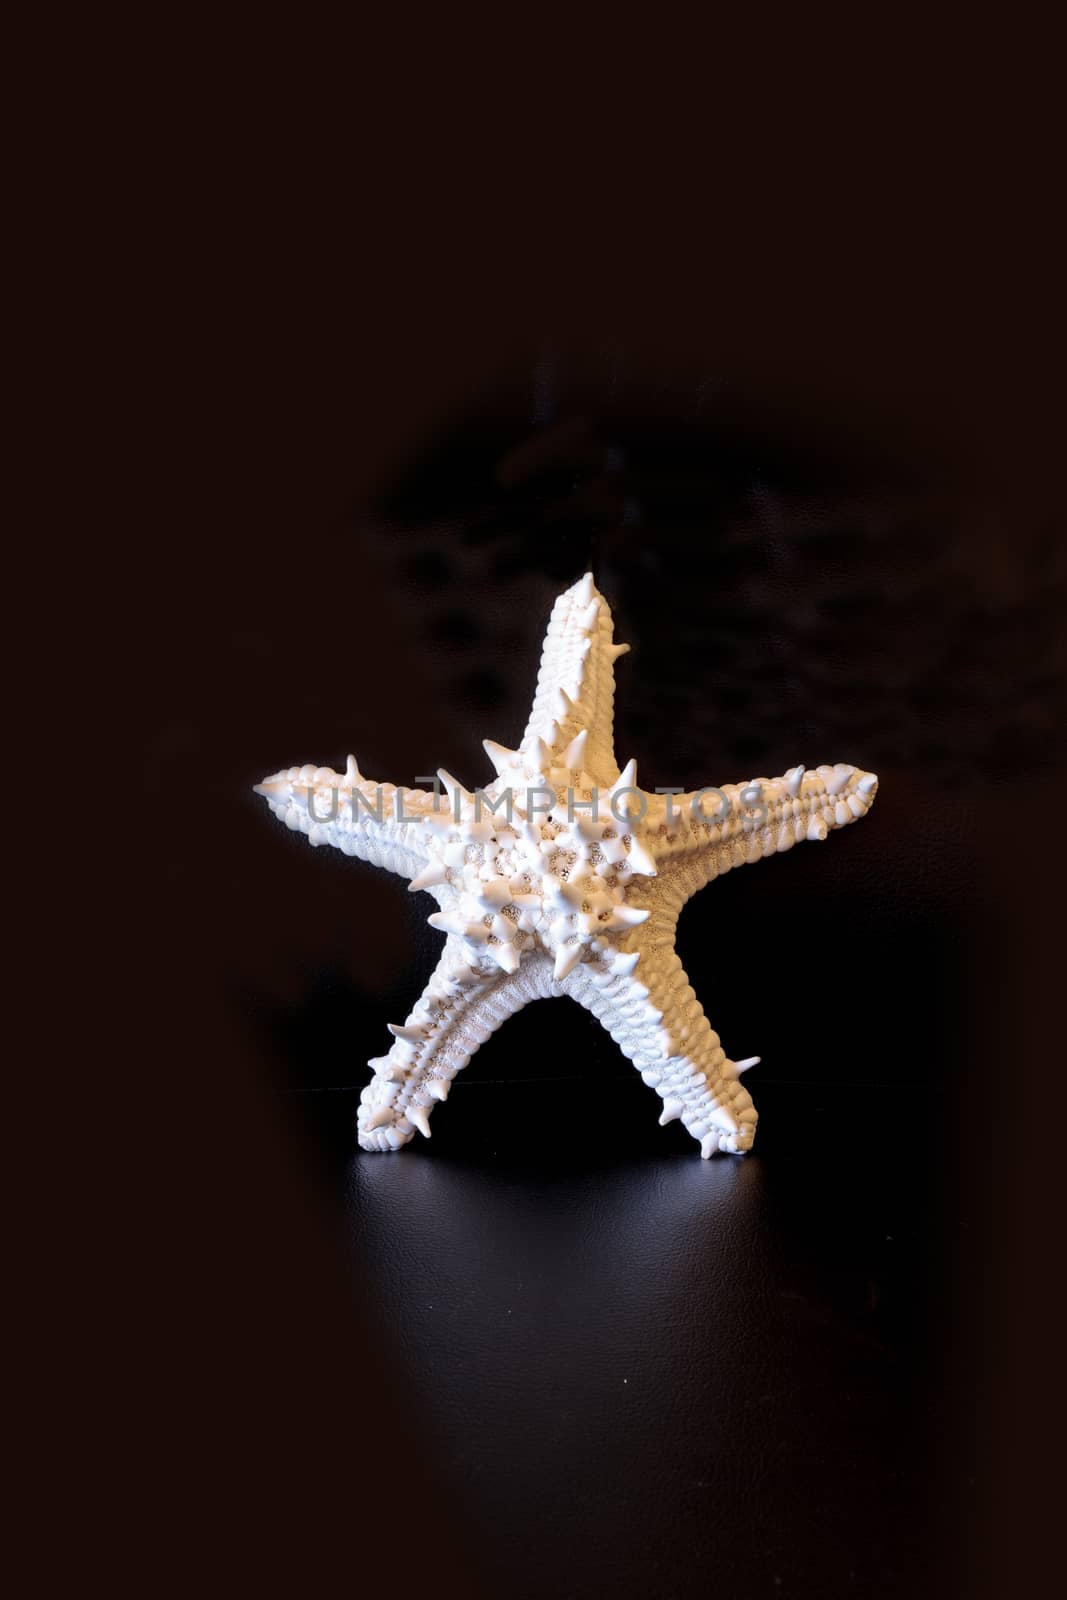 White horned sea star Protoreaster nodosus isolated on a black background